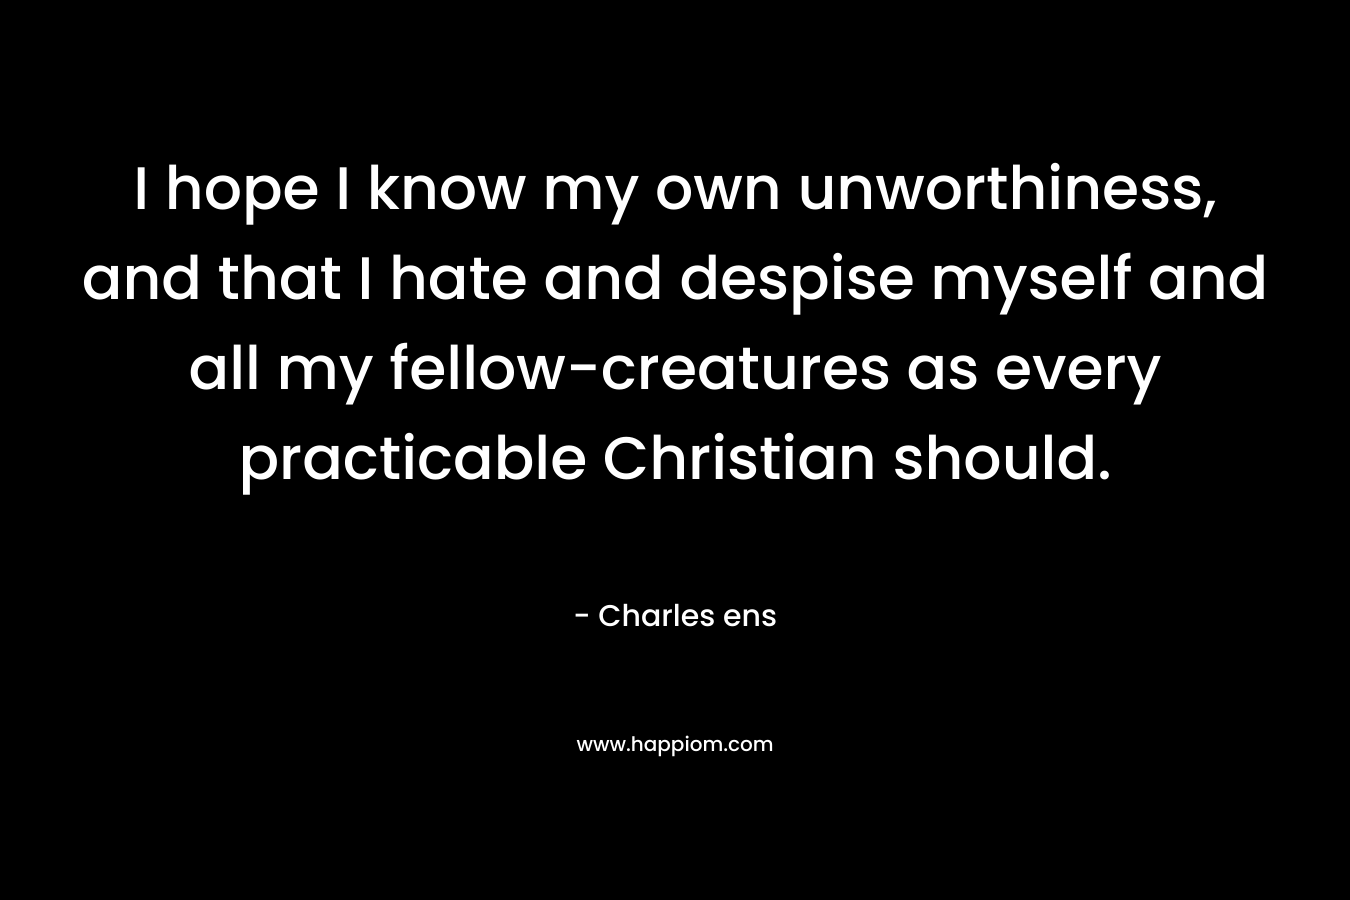 I hope I know my own unworthiness, and that I hate and despise myself and all my fellow-creatures as every practicable Christian should. – Charles ens